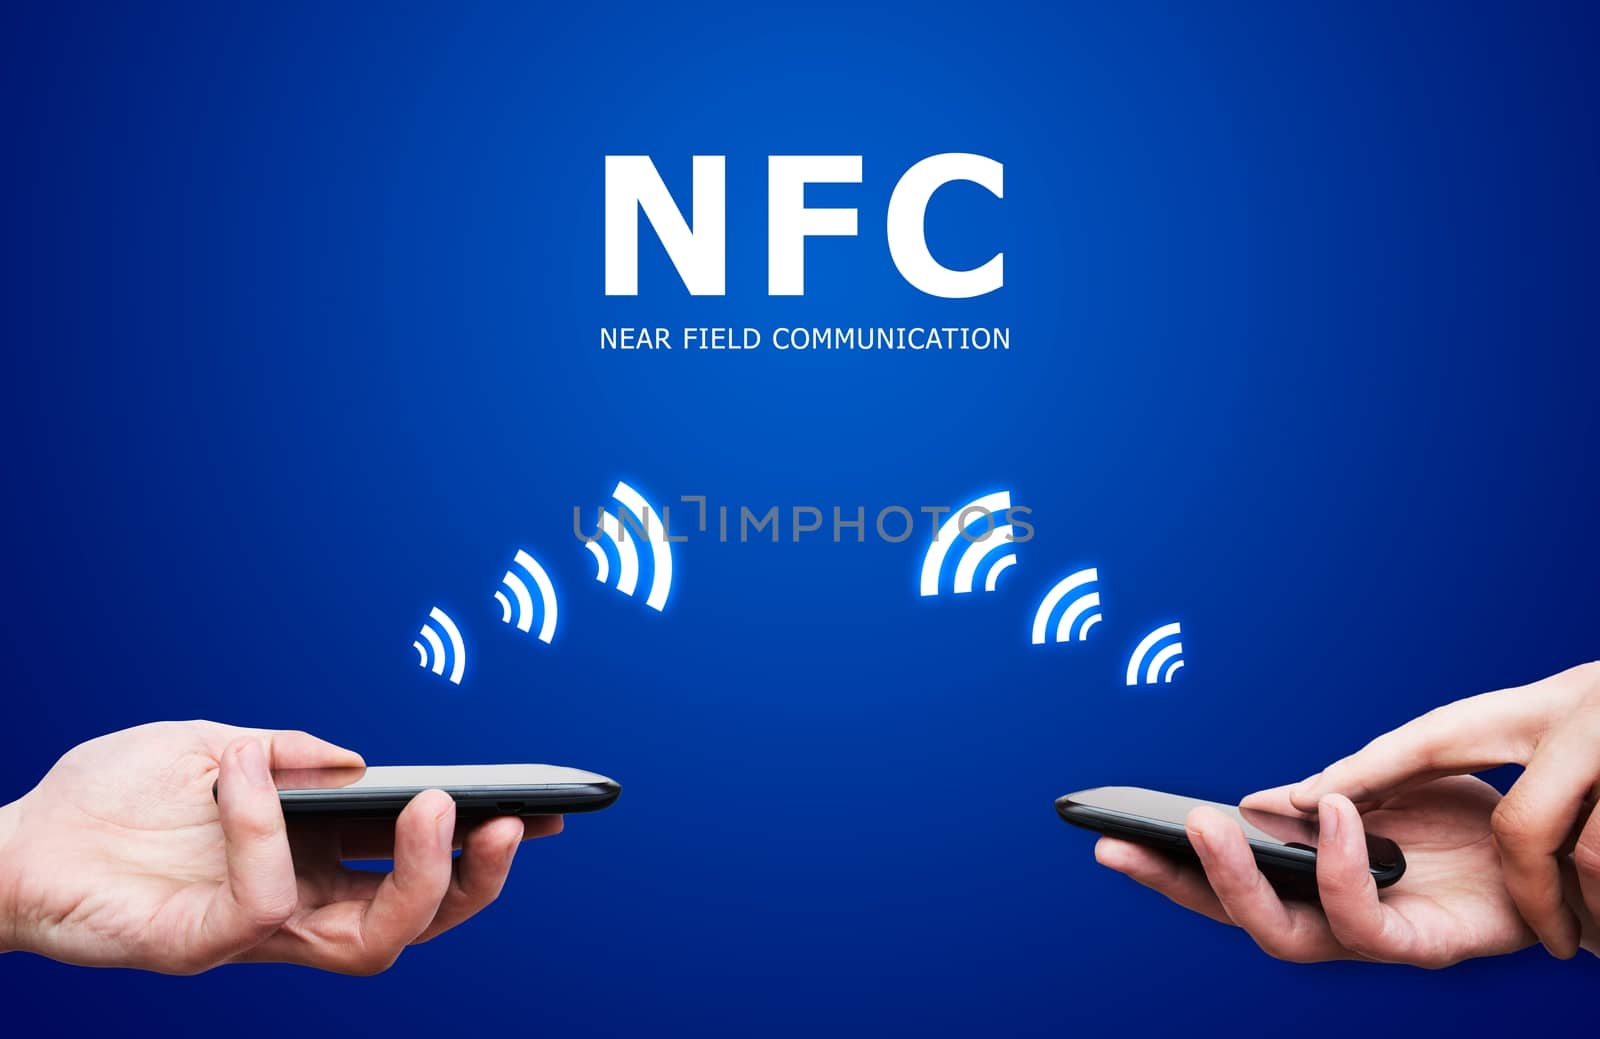 Hand holding smartphone with NFC technology - near field communi by simpson33